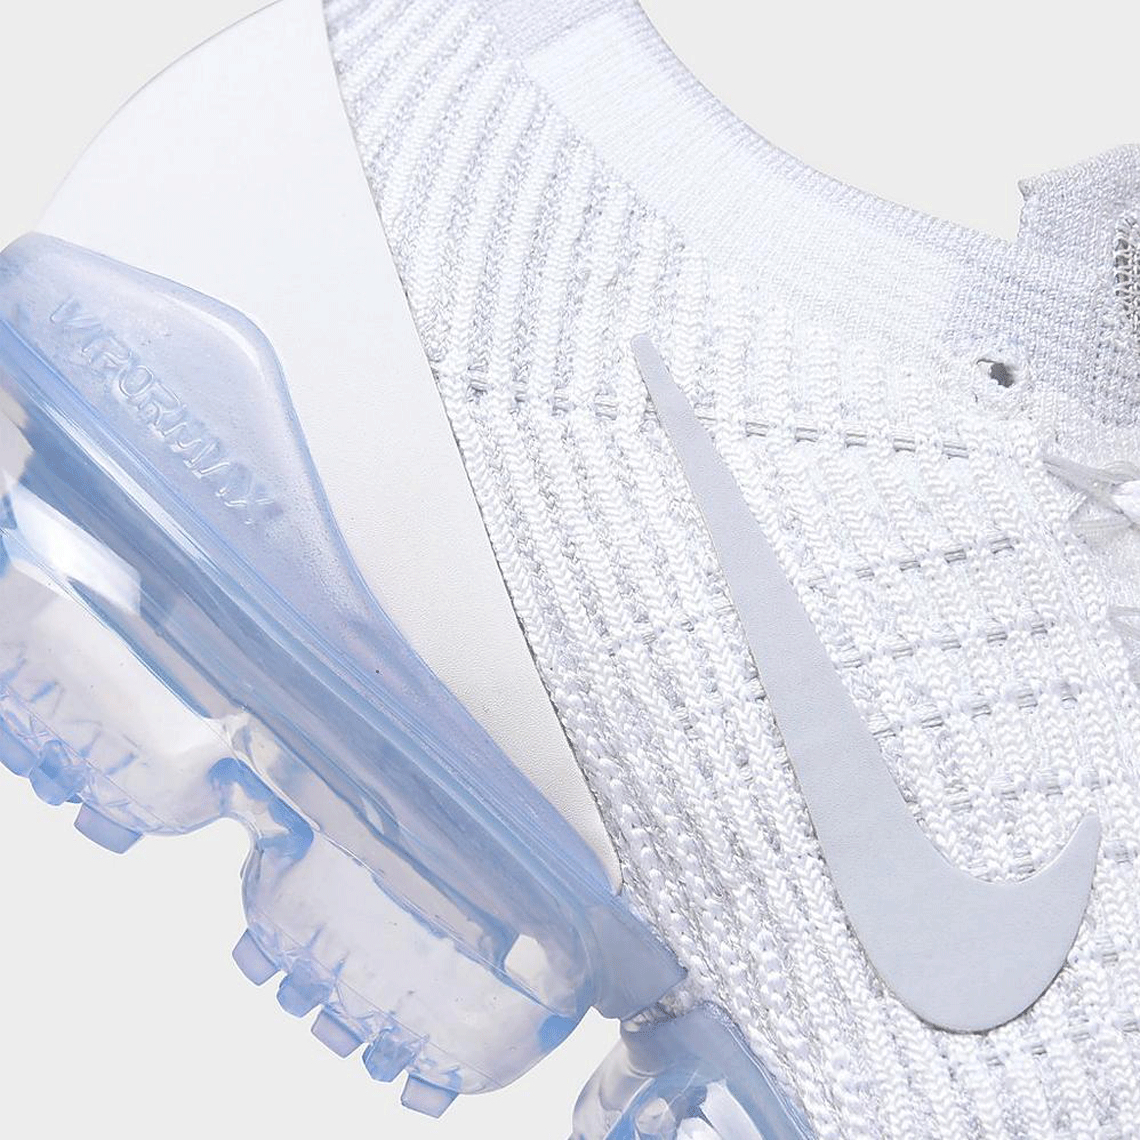 vapormax flyknit one of one